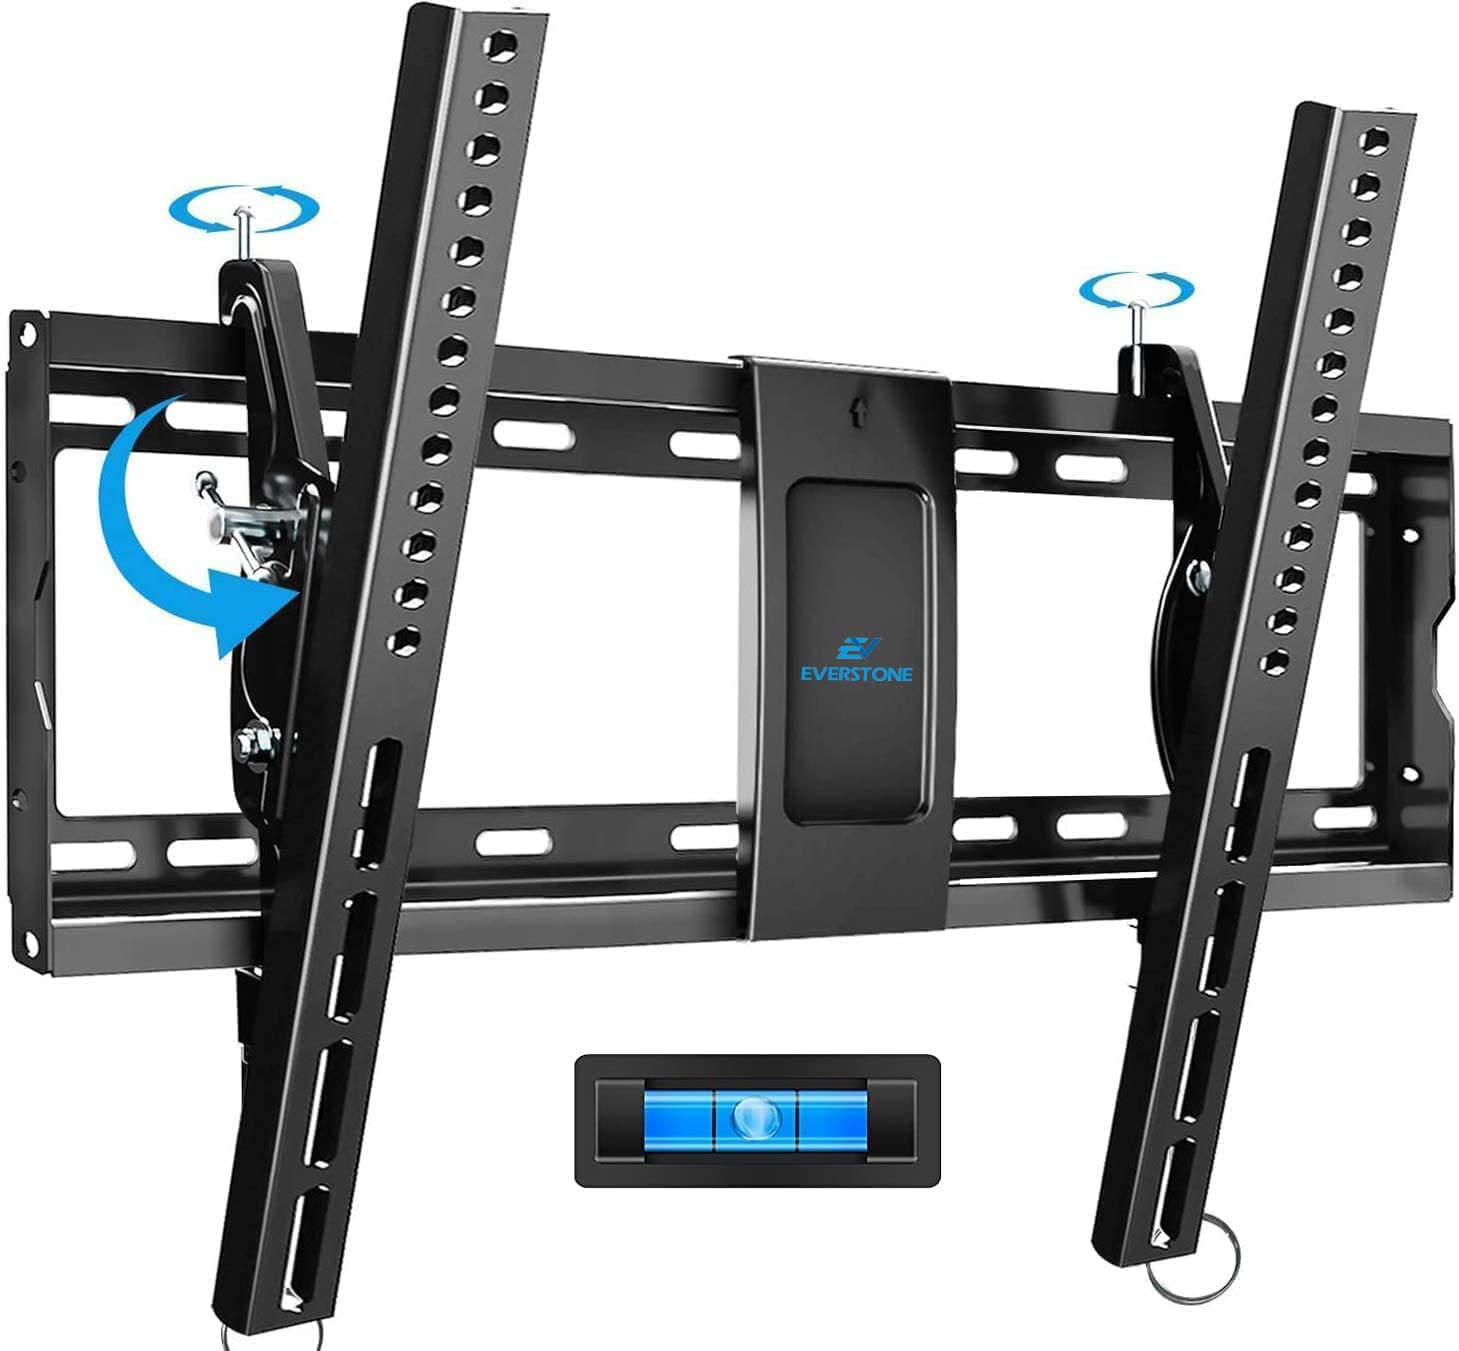 Everstone Adjustable Tilt TV Wall Mount Bracket for Most 32-90 Inch LED,LCD,OLED,Plasma Flat Screen,Curved TVs,Low Profile,Up to VESA 600x400 and 165 lbs,Fits 16